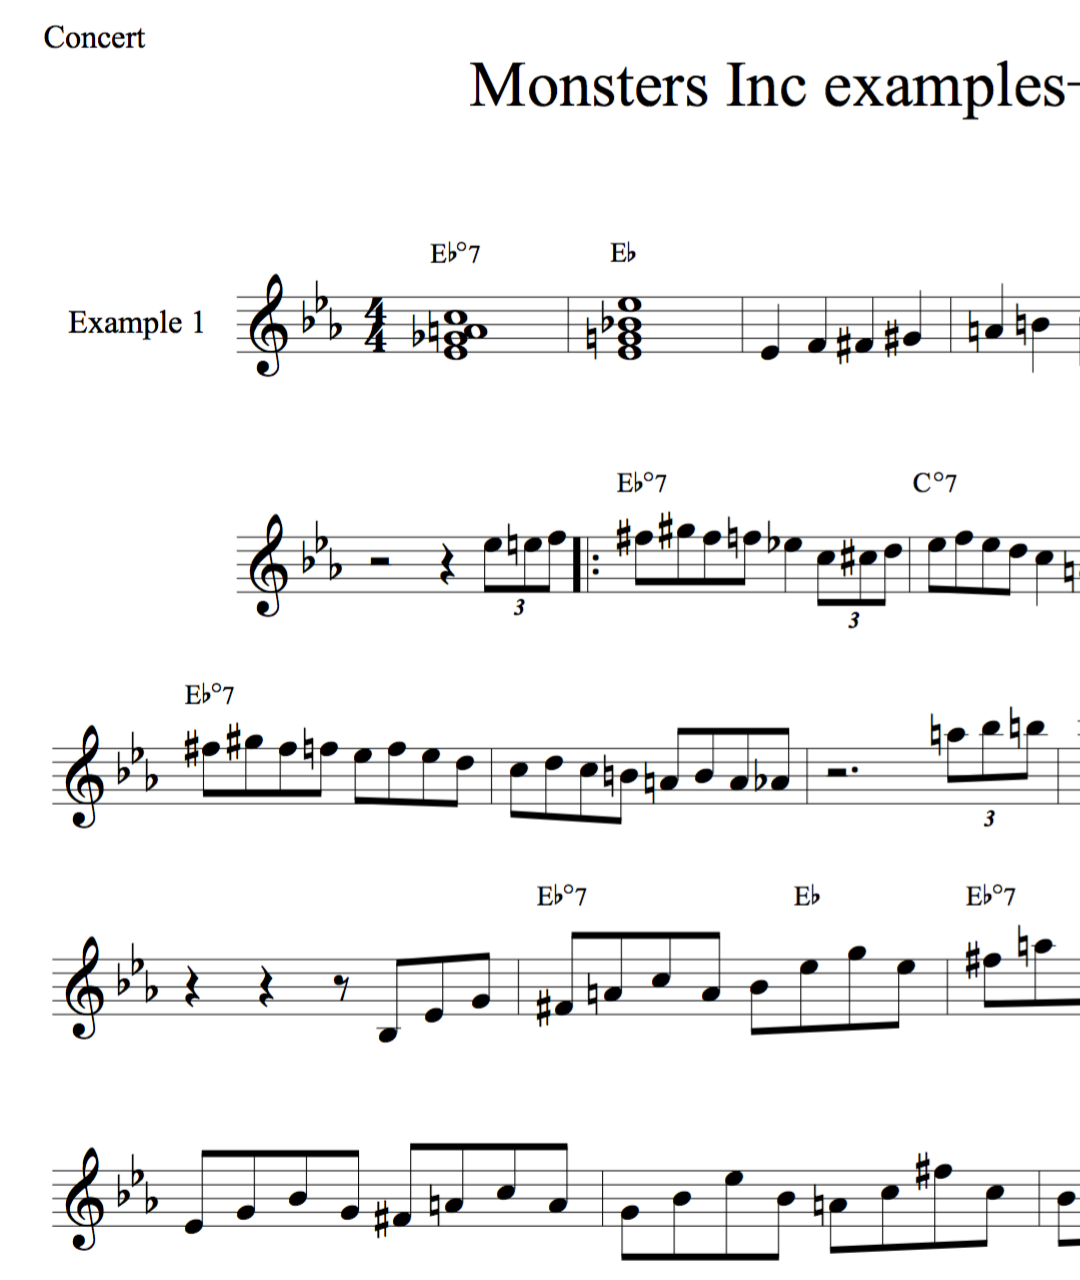 Monsters In exercises-jazz duets